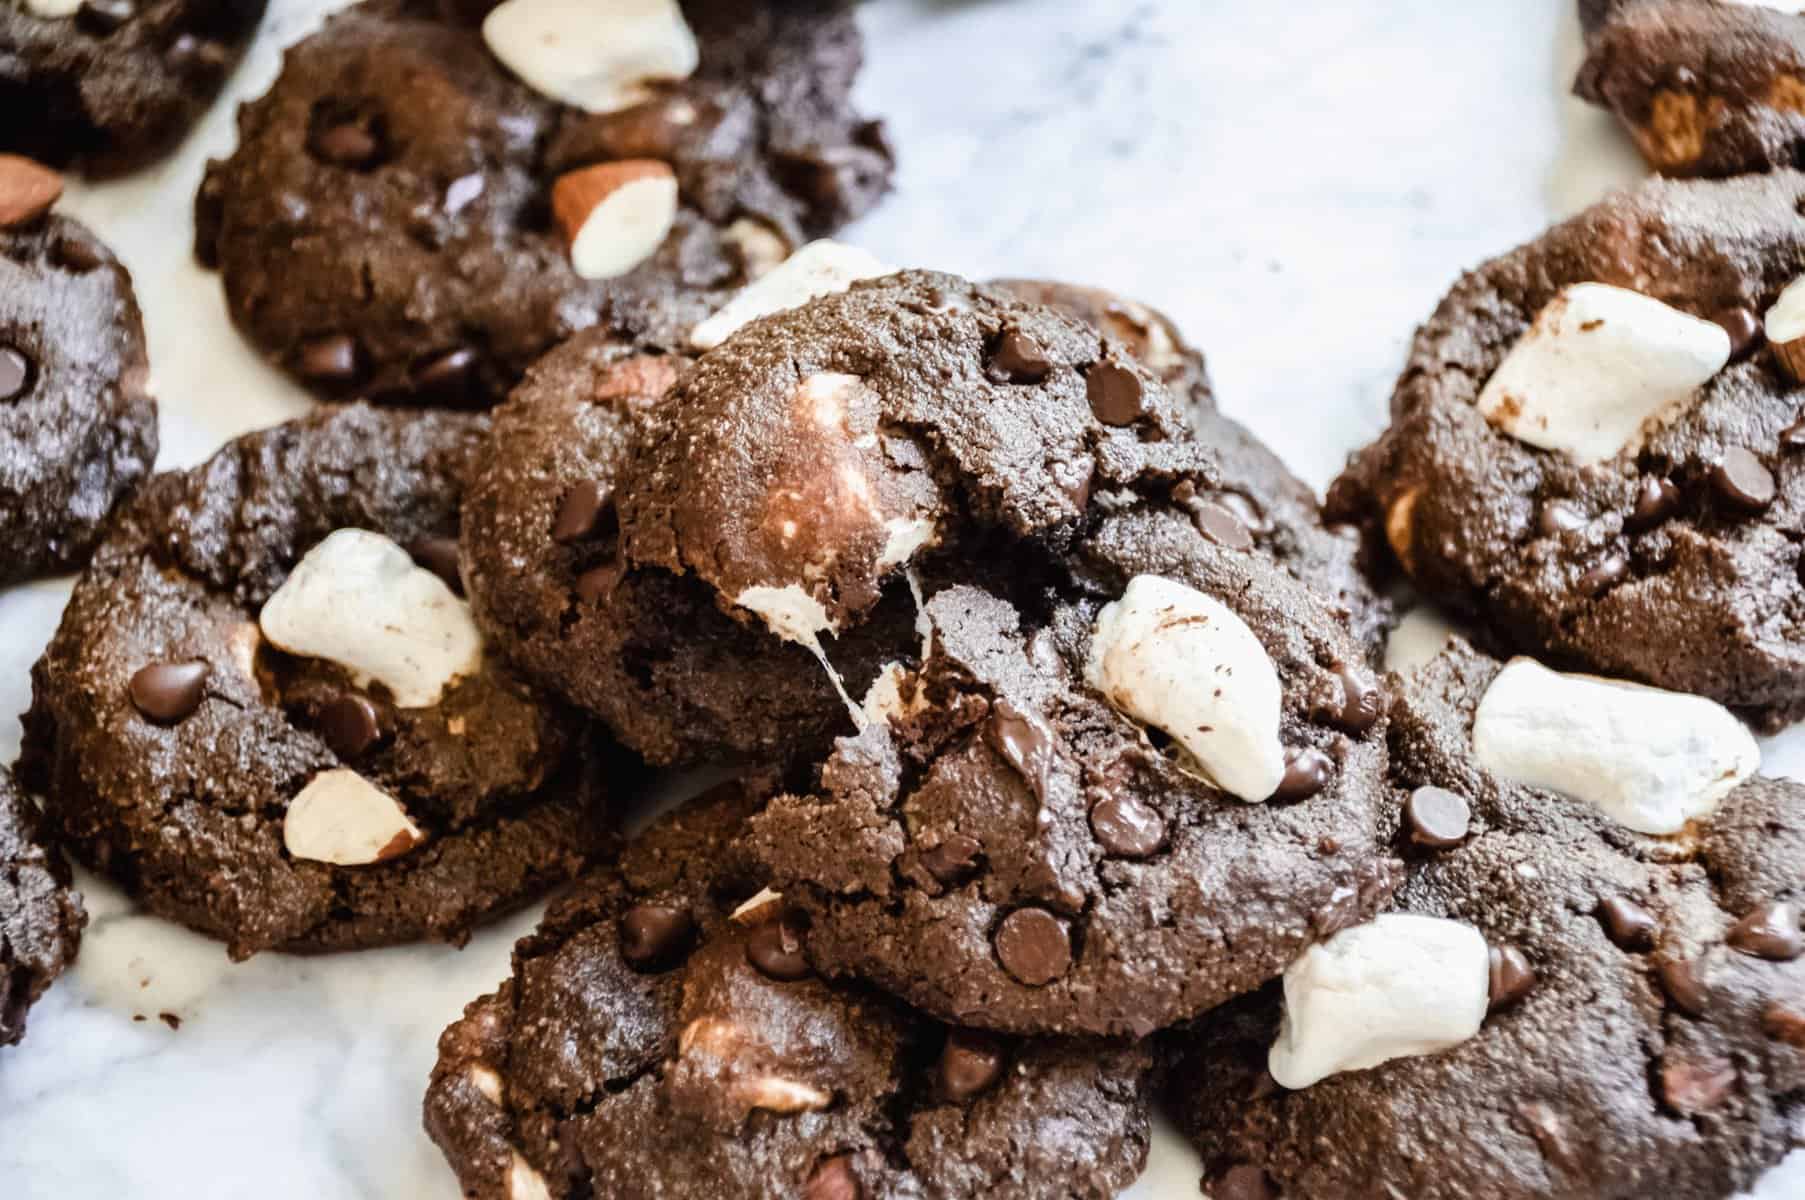 A close up straight view of several vegan rocky road cookies.